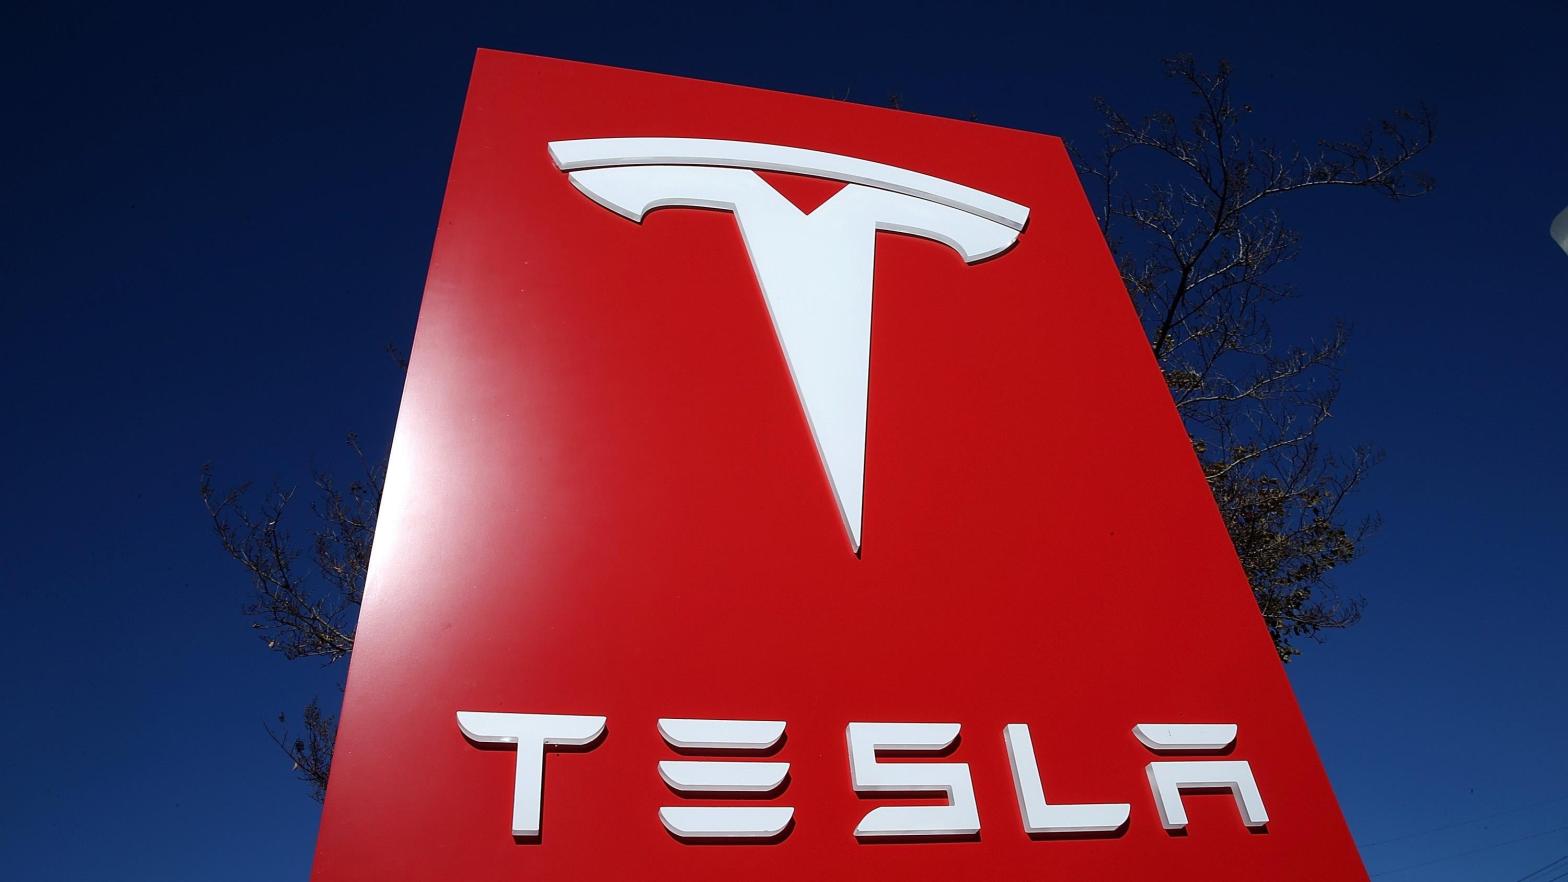 Tesla employees working on the company's Autopilot function began announced the union push earlier this week, seeking better pay, job security, and protection against retaliation from Tesla.  (Image: Justin Sullivan, Getty Images)